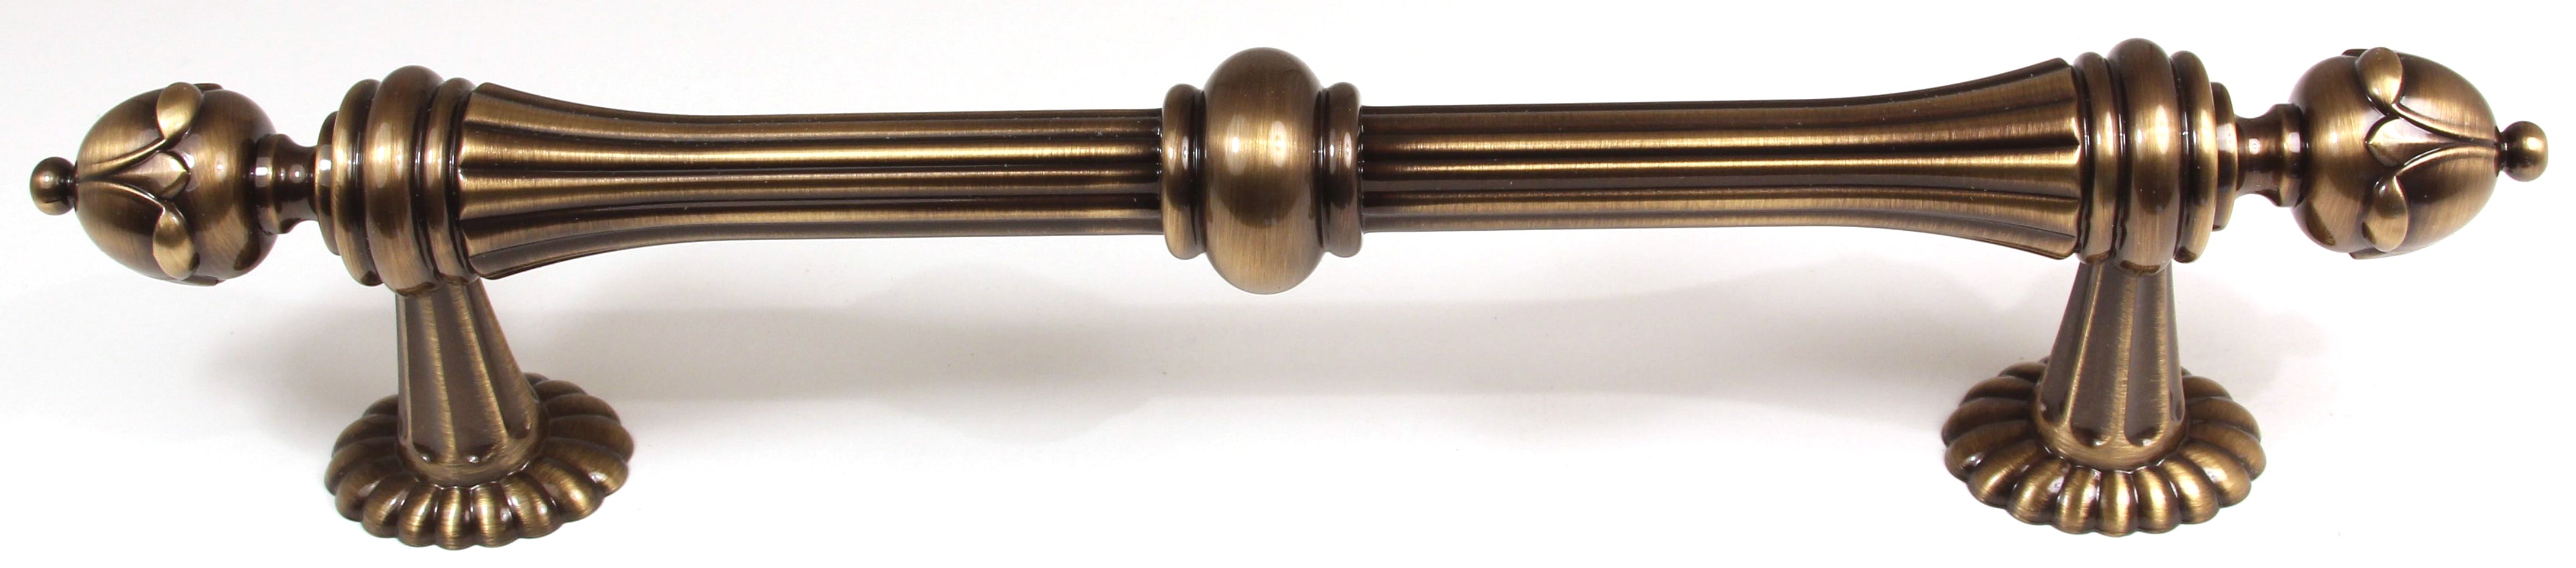 antique english appliance pull